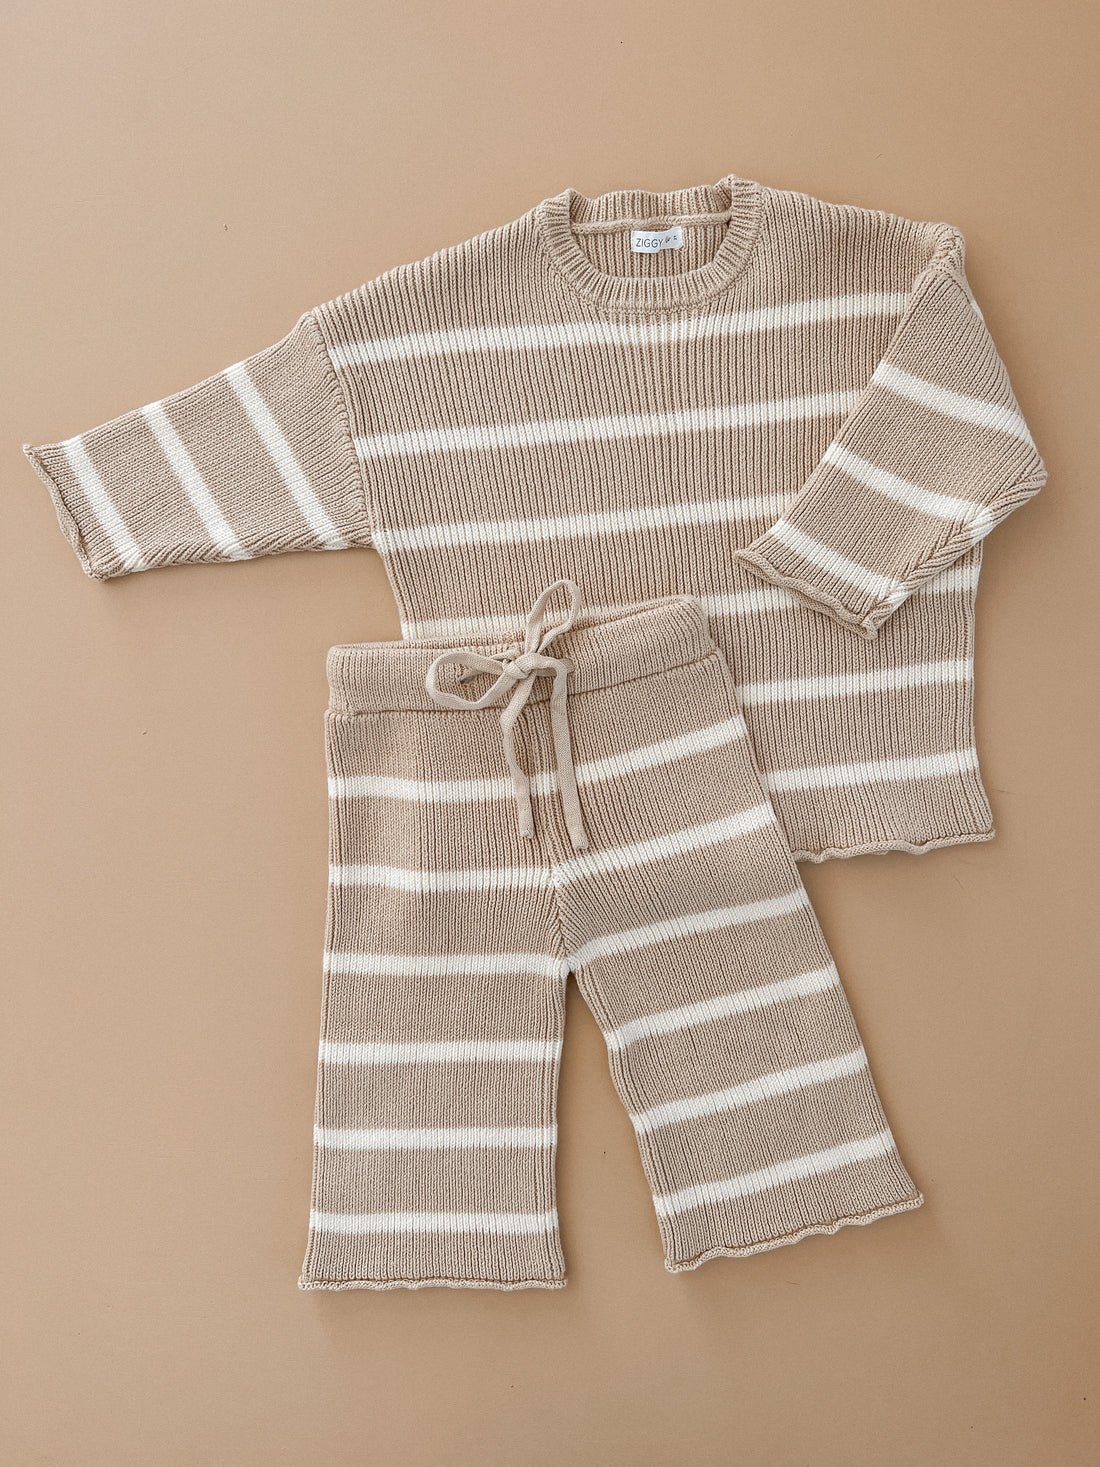 【LAST ONE】ZIGGY LOU - PULLOVER | BISCUIT STRIPES RIBBED